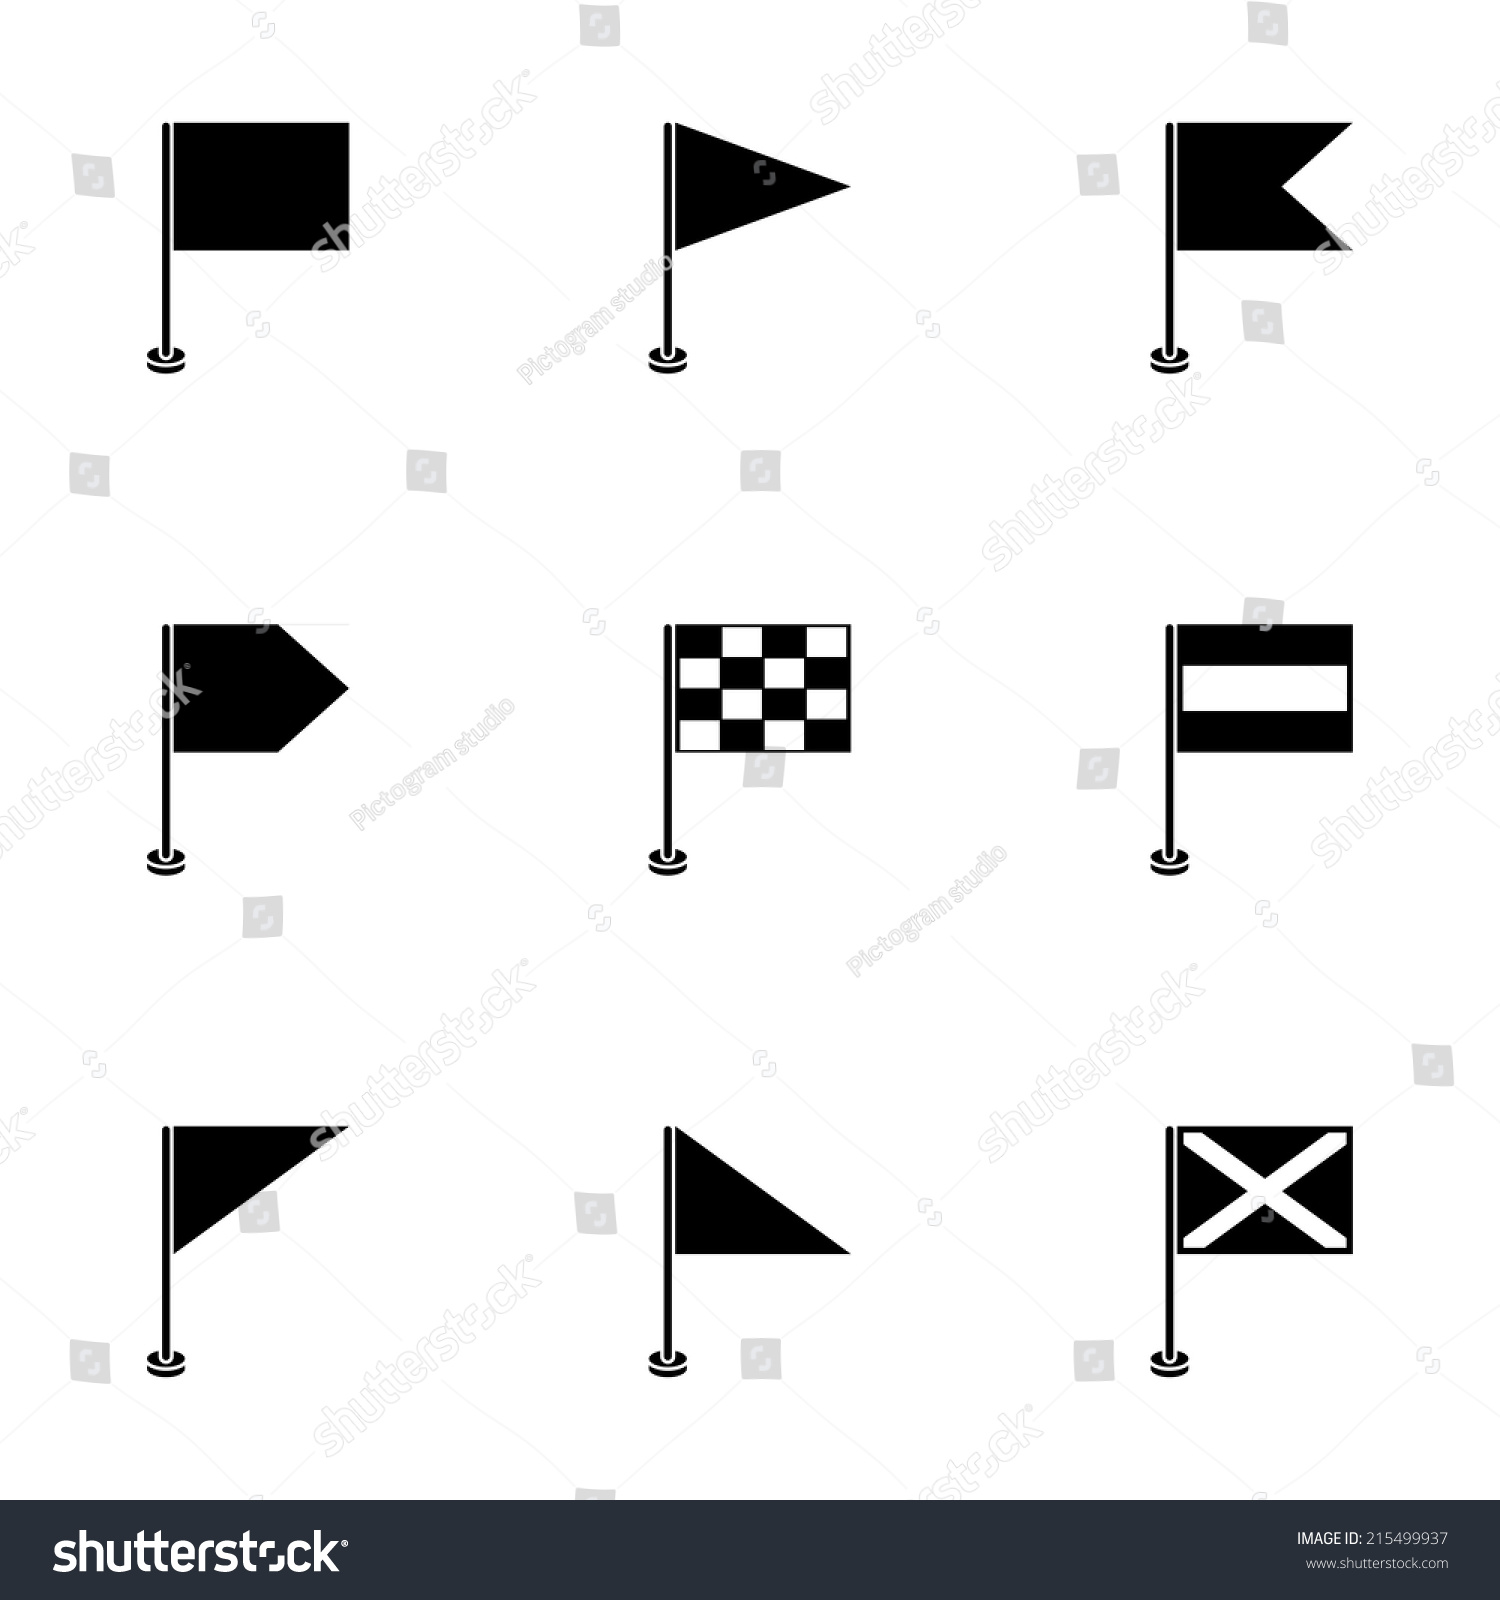 Vector Black Flags Icons Set On White Background - 215499937 : Shutterstock